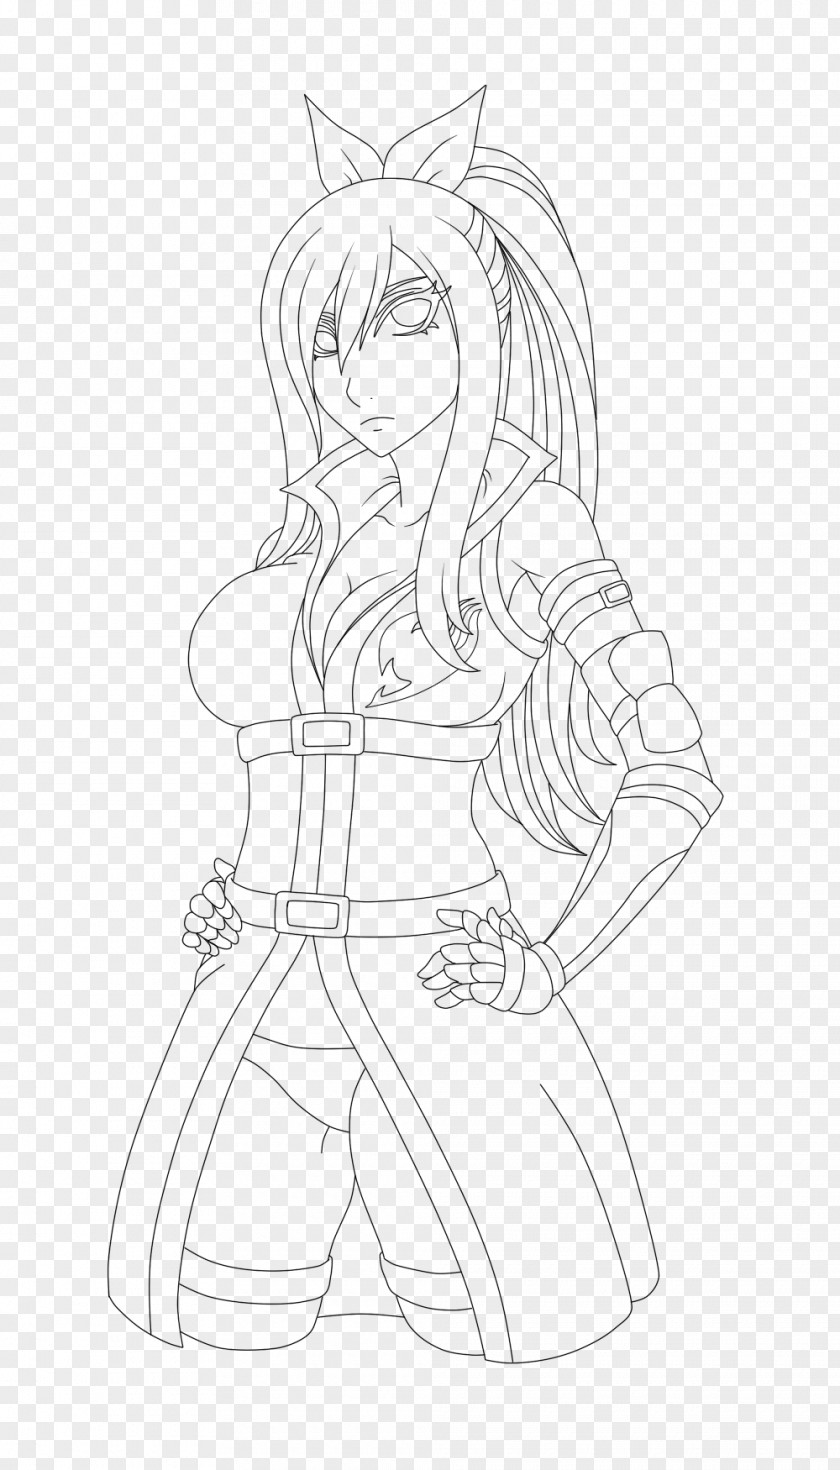 Sleeve Drawing Line Art Cartoon Sketch PNG art Sketch, fairy tail hentai clipart PNG